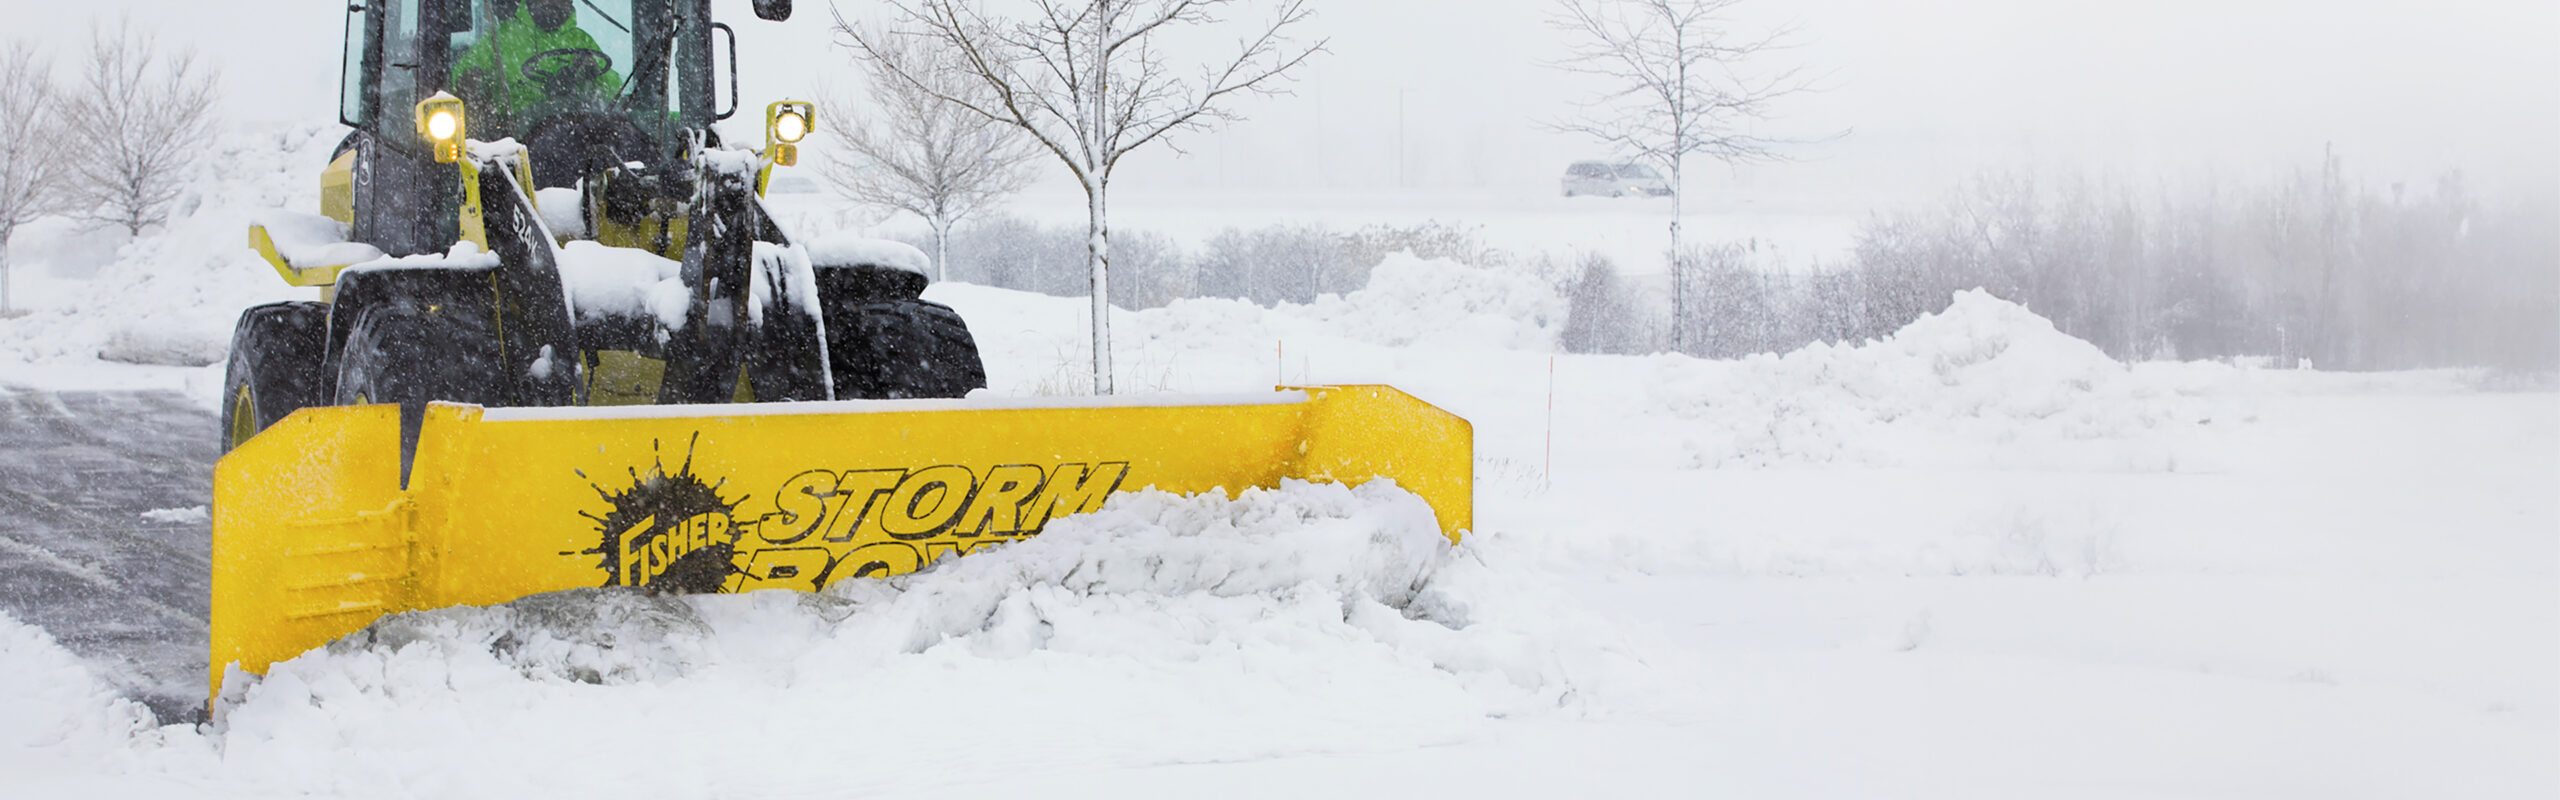 storm boxx hx pusher plow with trace edge technology - coming soon